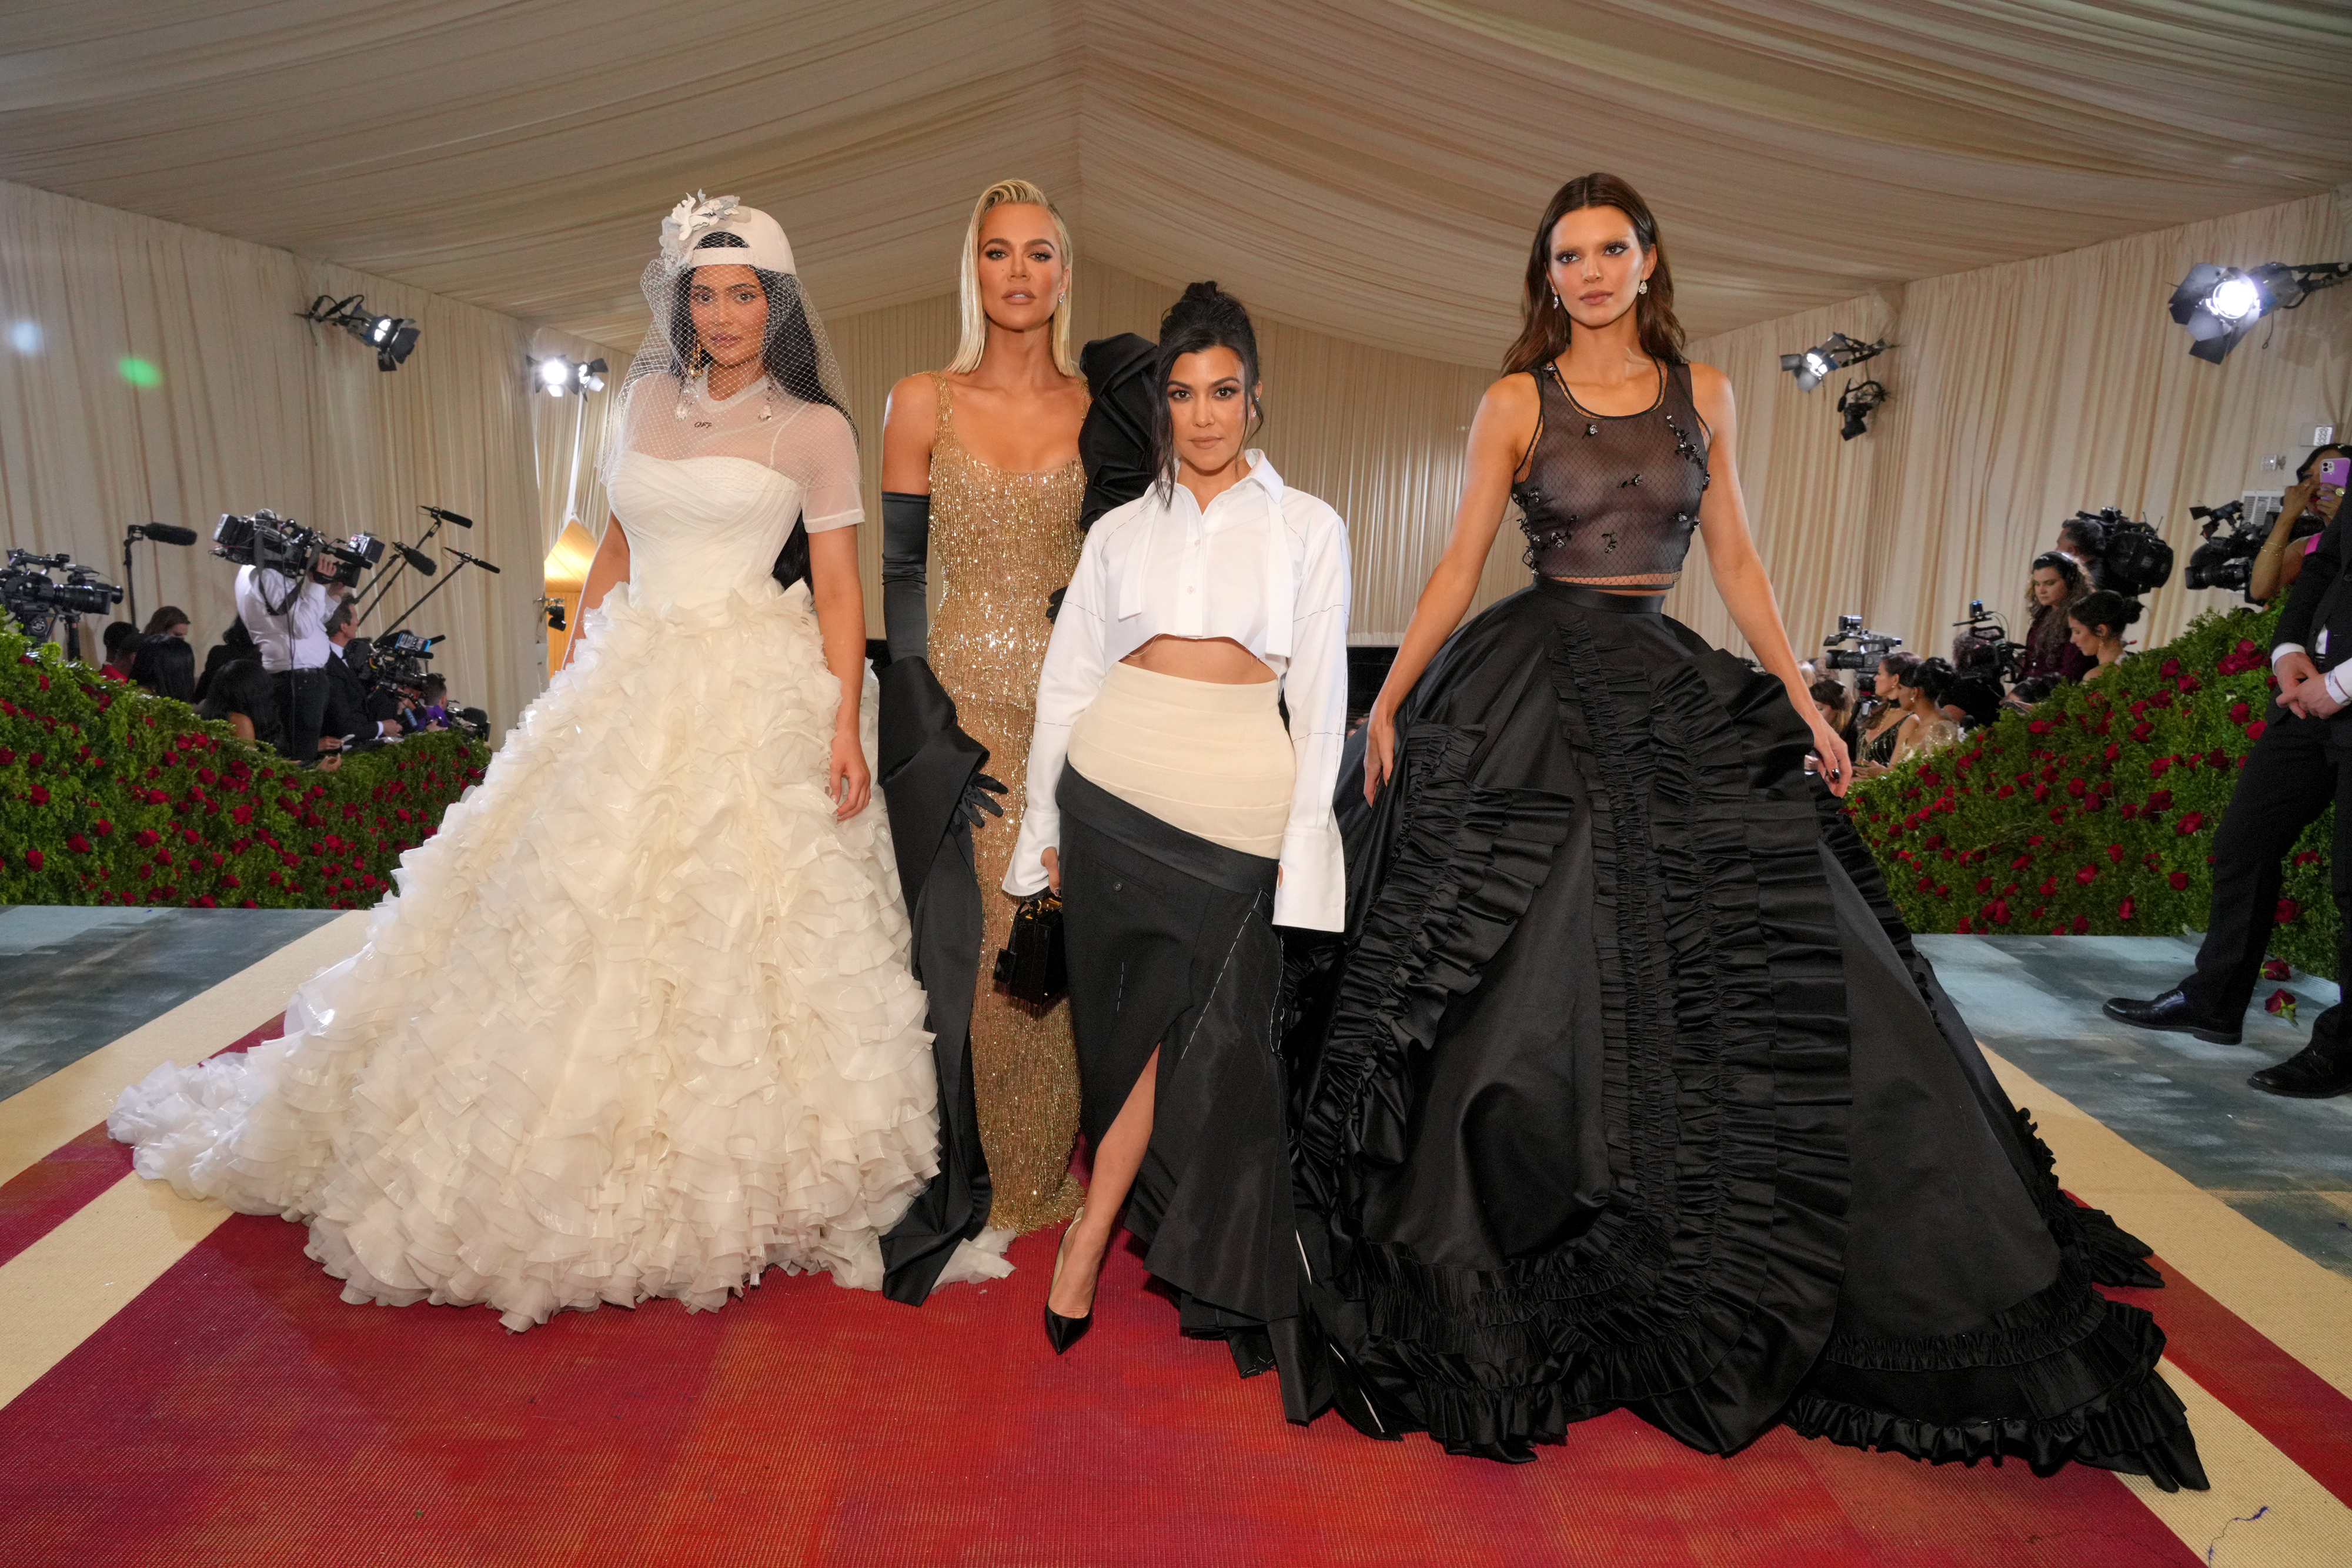 kylie, khloe, kourt and kendall on the red carpet